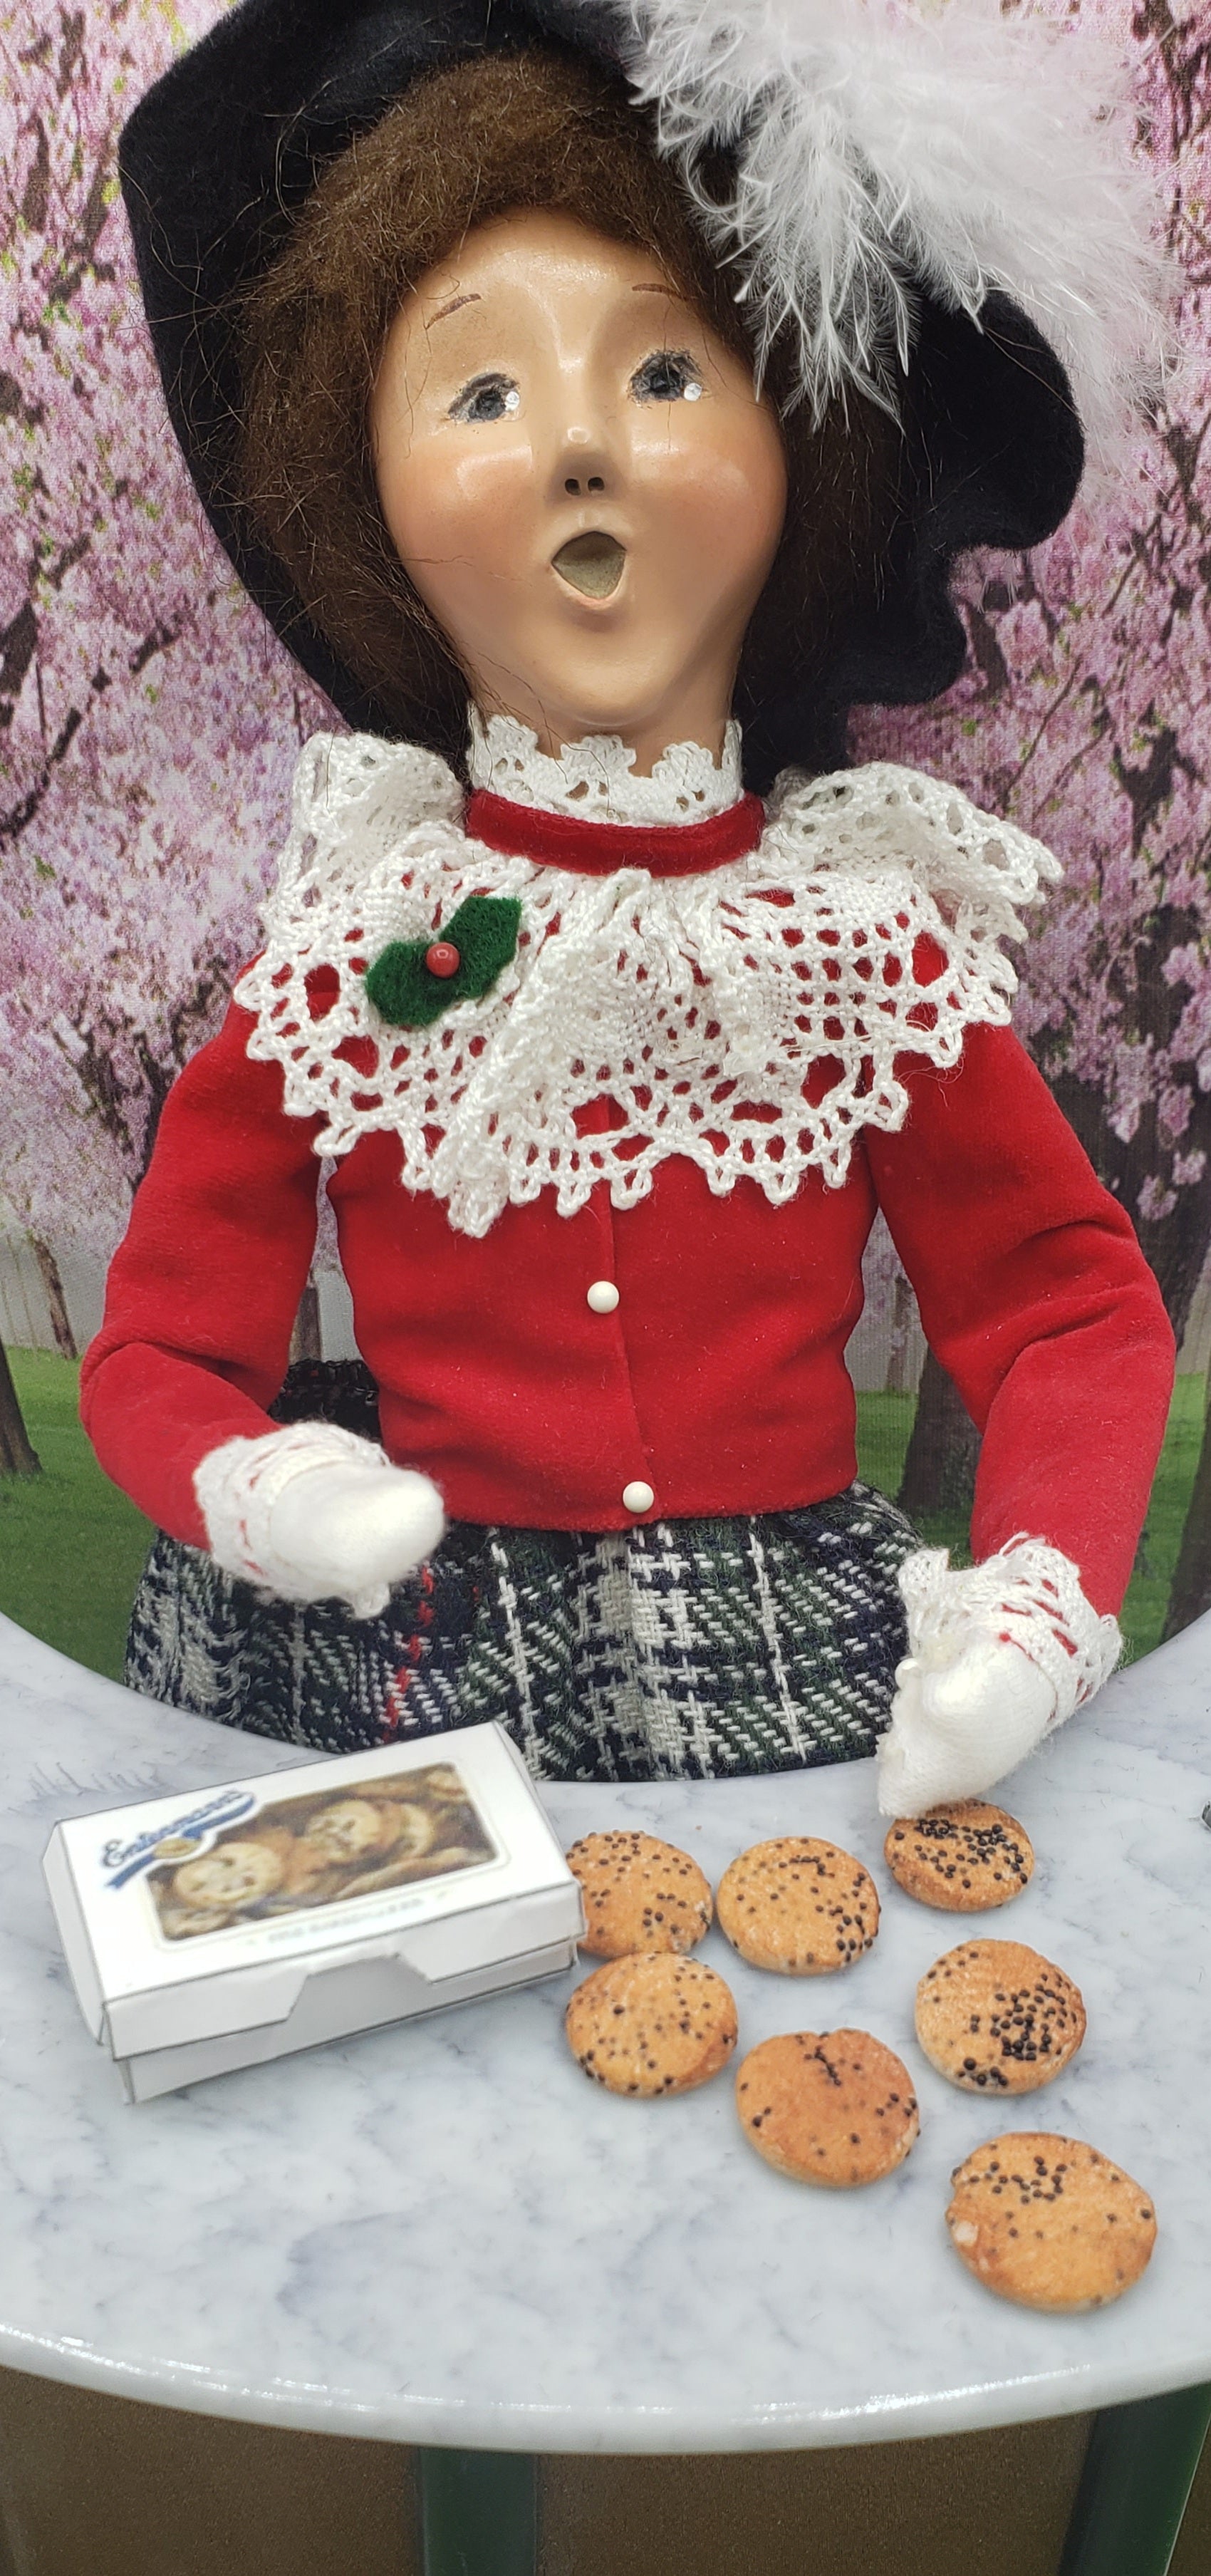 Byers choice doll with cookies